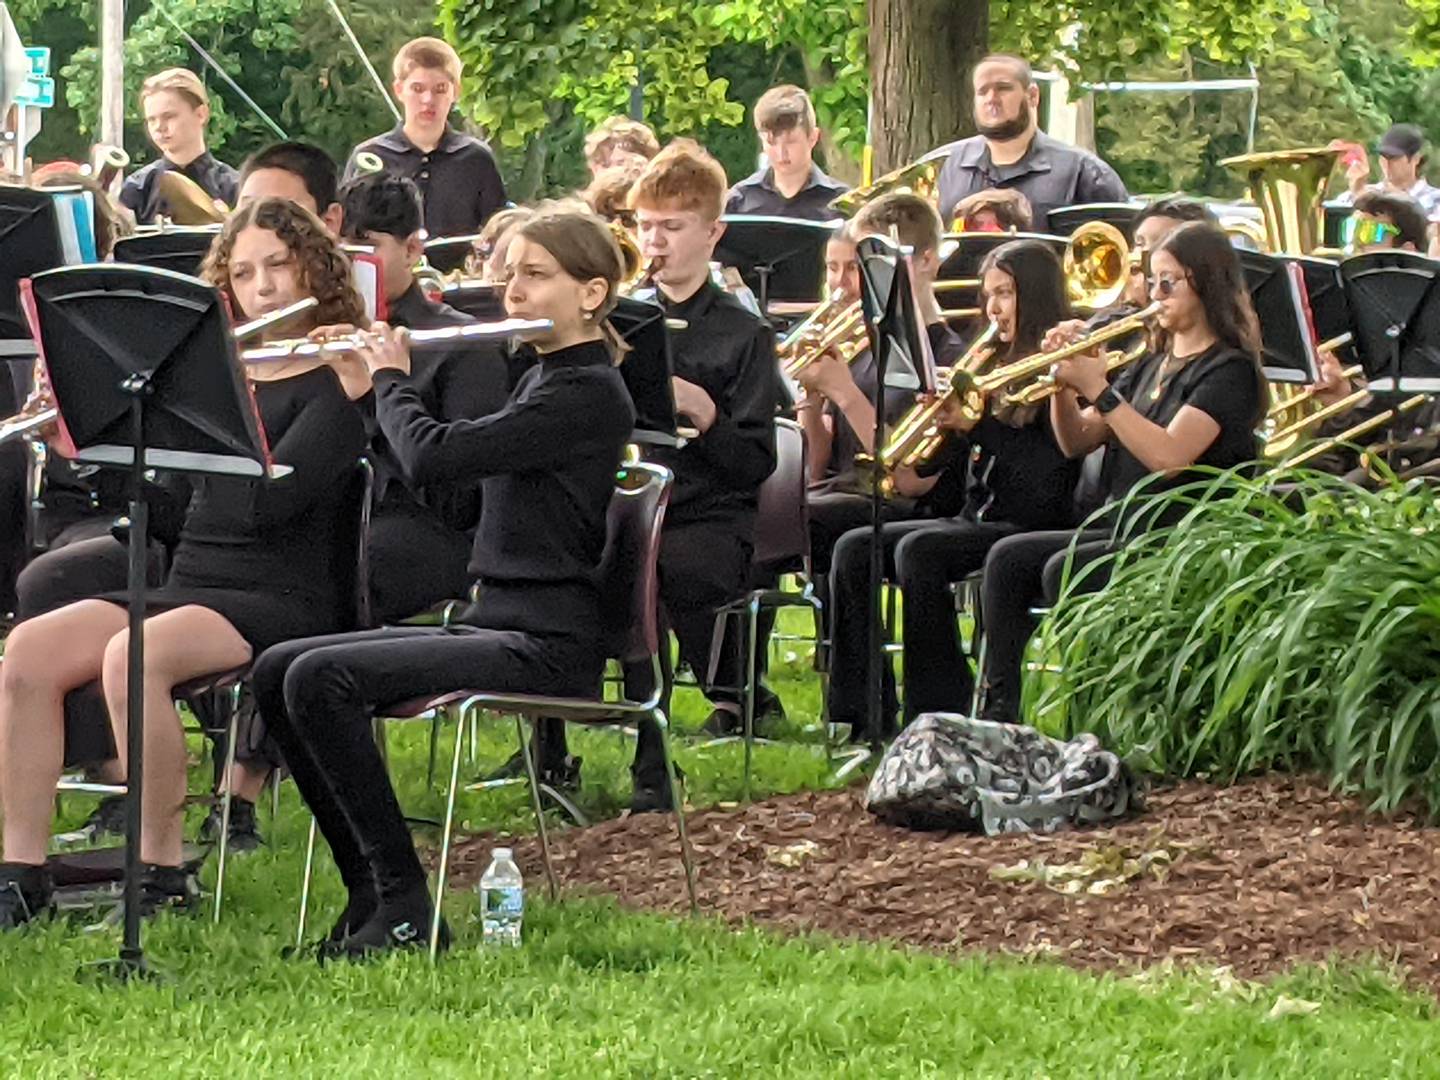 The Yorkville Middle School Band performed during the Yorkville American Legion Memorial Day ceremony May 27 in Town Square Park in Yorkville.